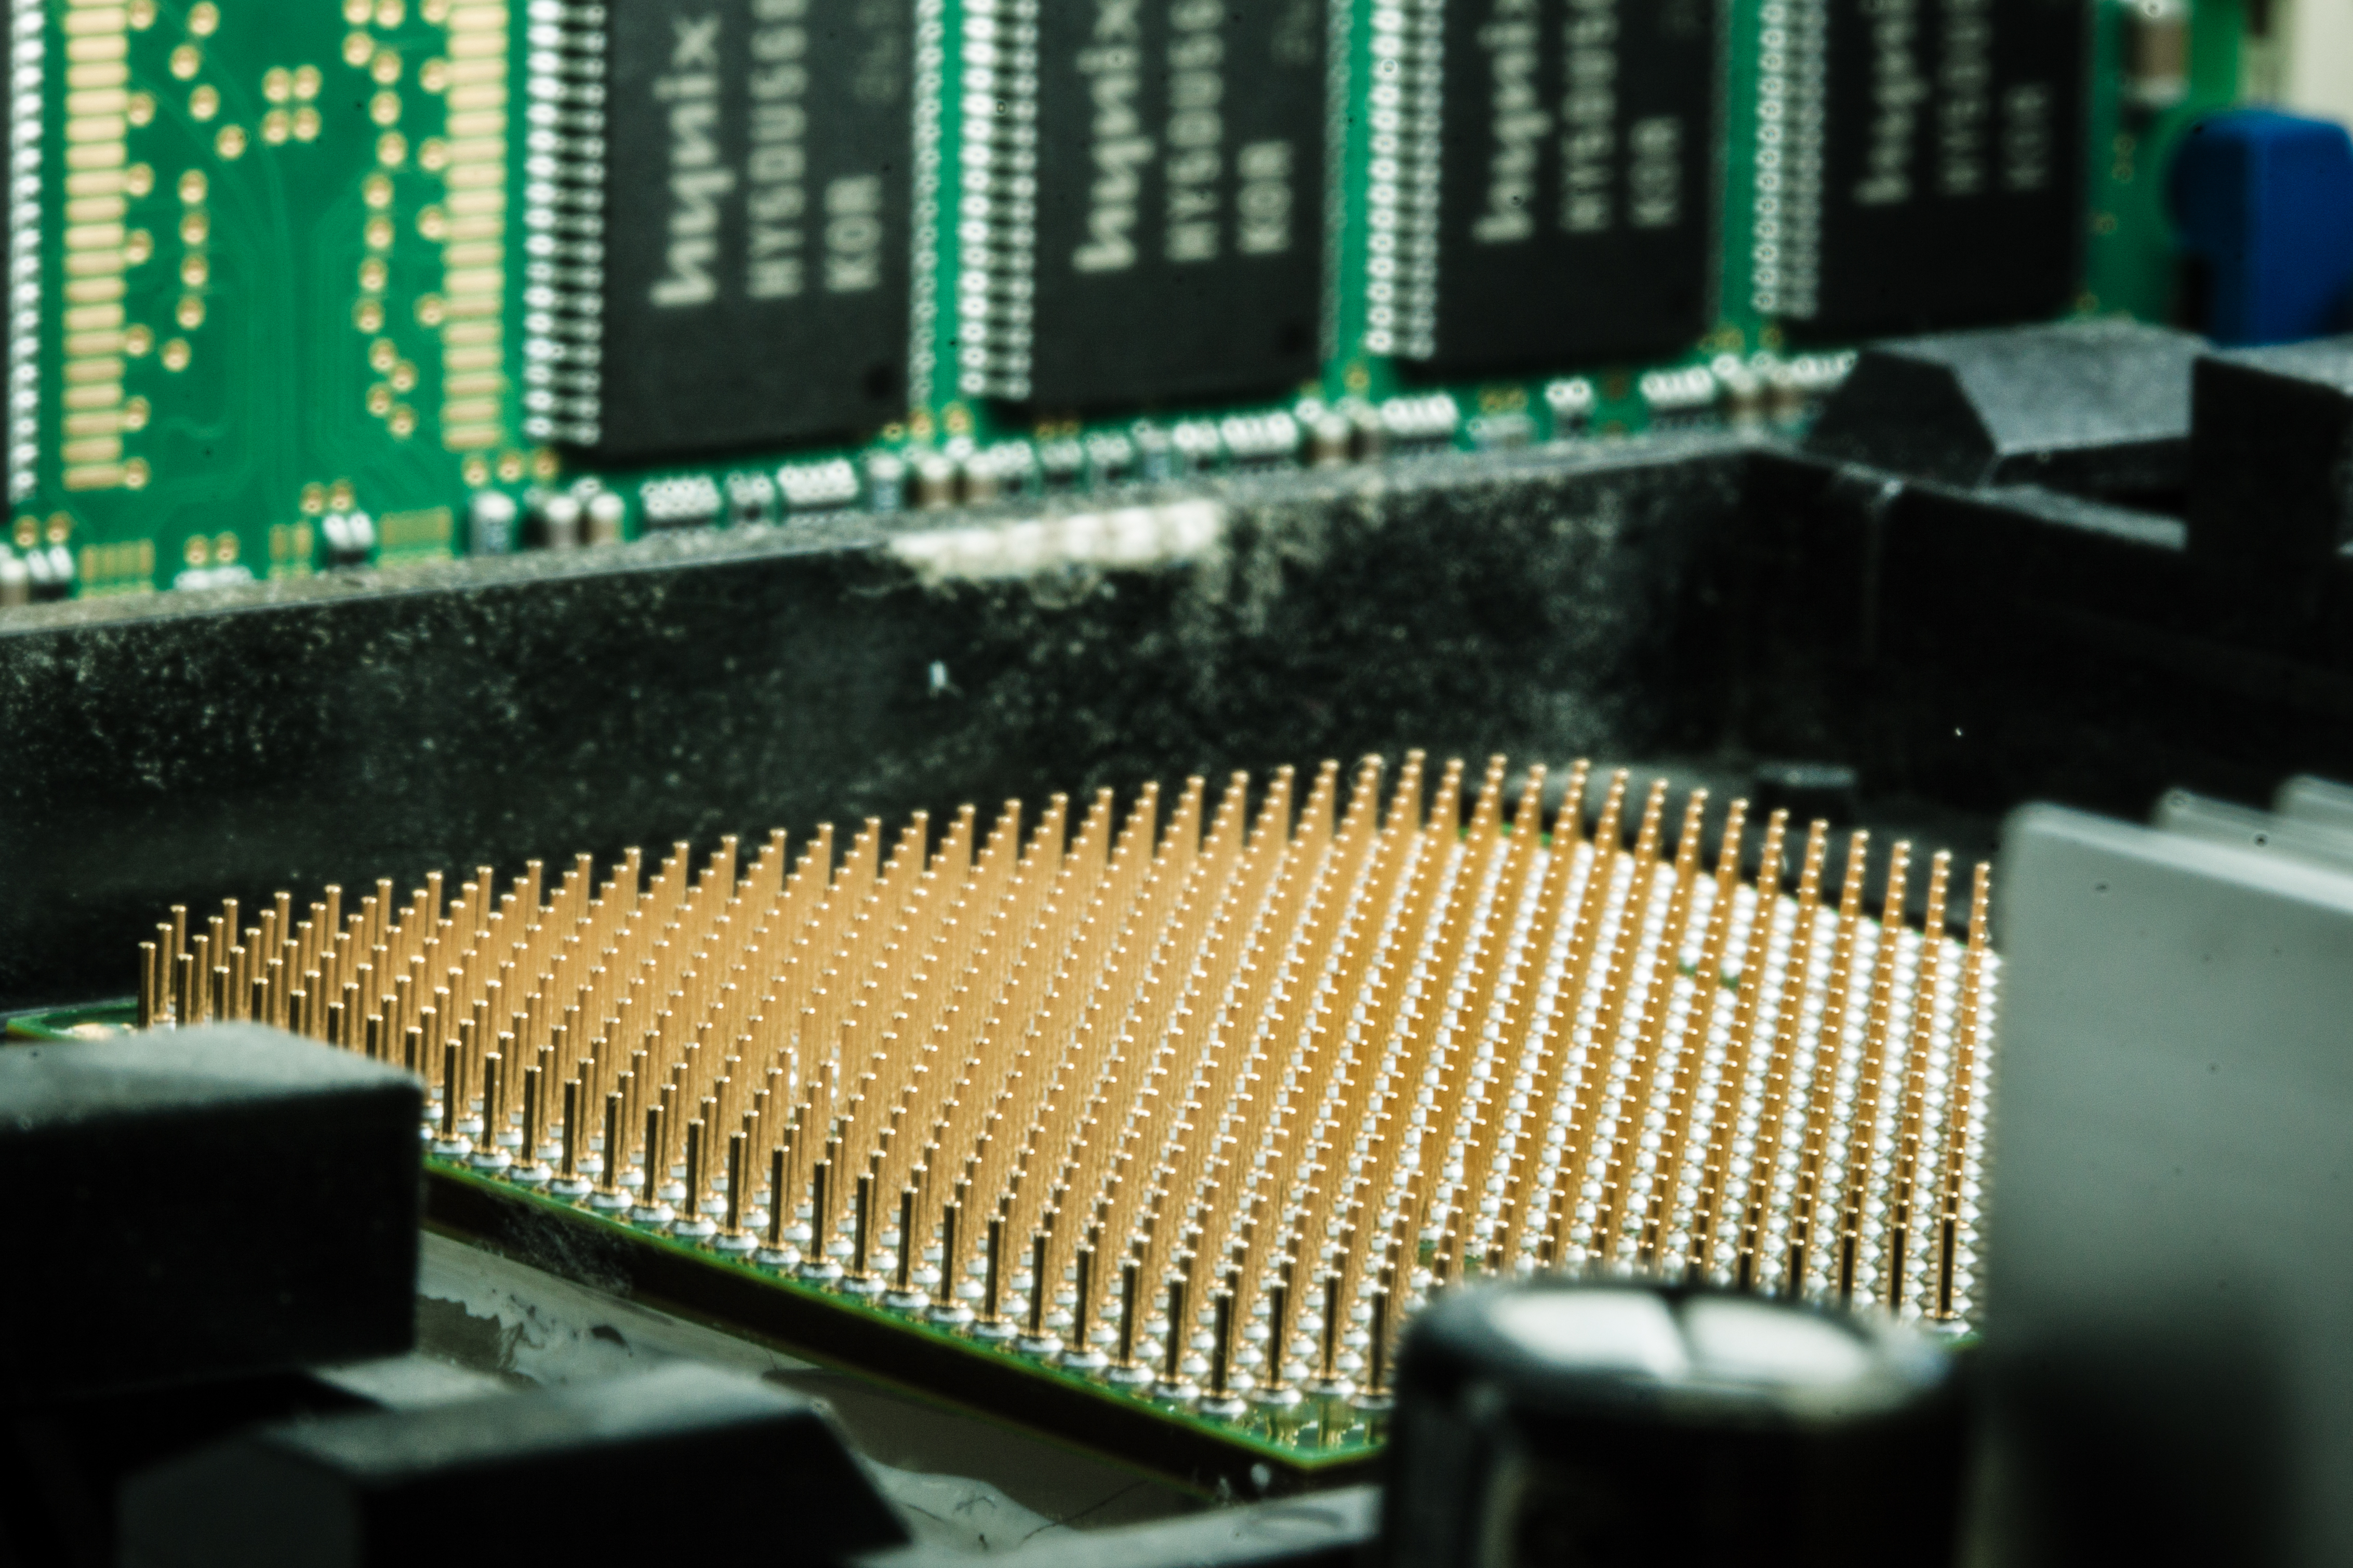 A close-up picture of a computer board.